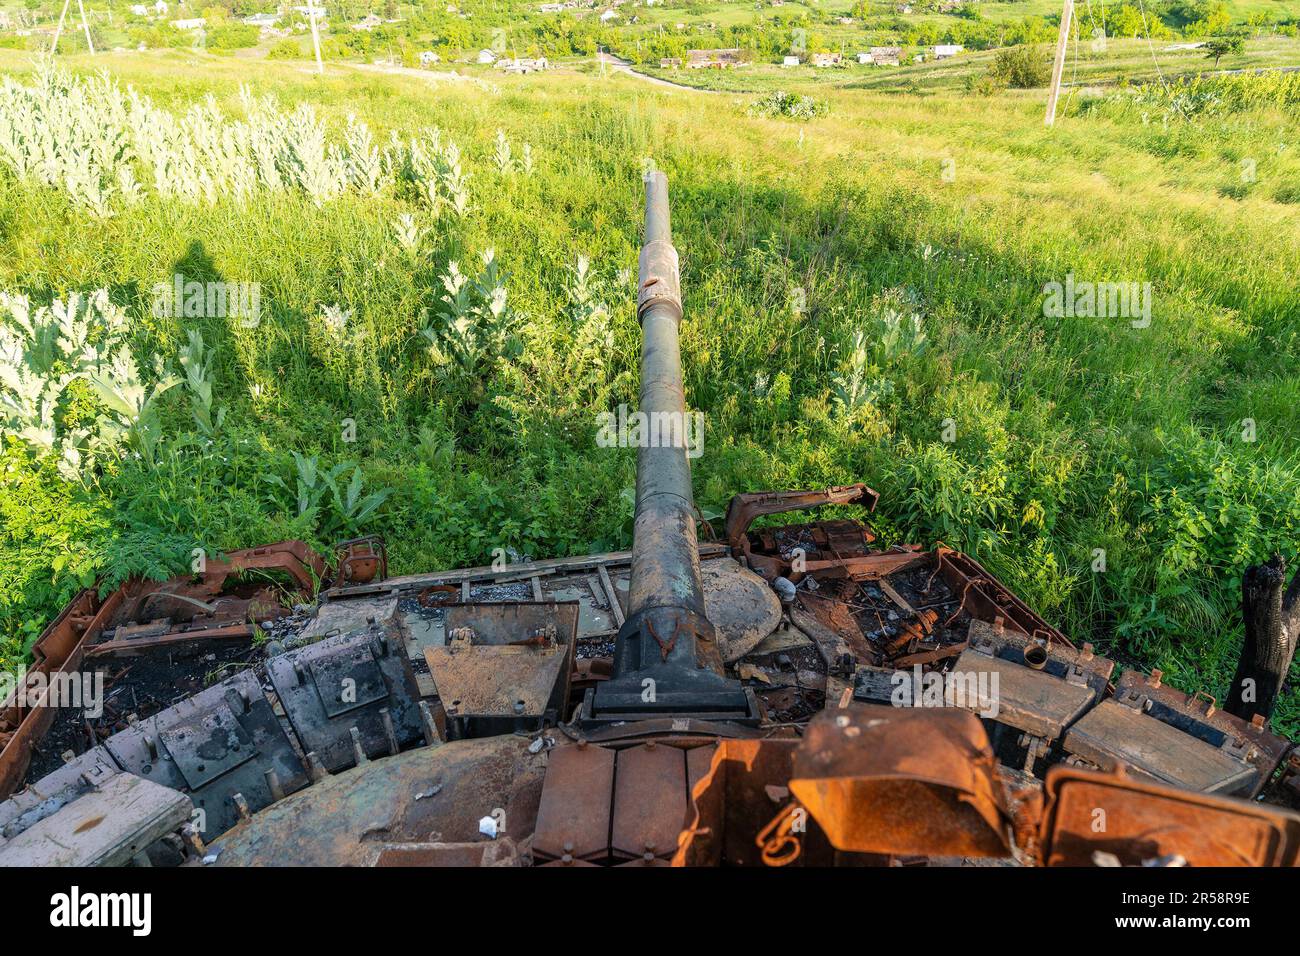 View of destruction of village of Bohorodychne in Donetsk region by Russian forces during occupation from August 2022 until September 2022 from destroyed Russian tank used to shell the village. Russian forces attacked the village in May 2022 and finally occupied the village in August for 2 months, it was liberated in September 2022. From the hills surrounding the village Russian forces shelled and destroyed homes, school and the famous Church of the Holy Mother of God ‘Joy of All Who Sorrow'. The church became a convent of the Sviatohirsk Lavra in 2008. The church belongs to the Ukrainian Orth Stock Photo